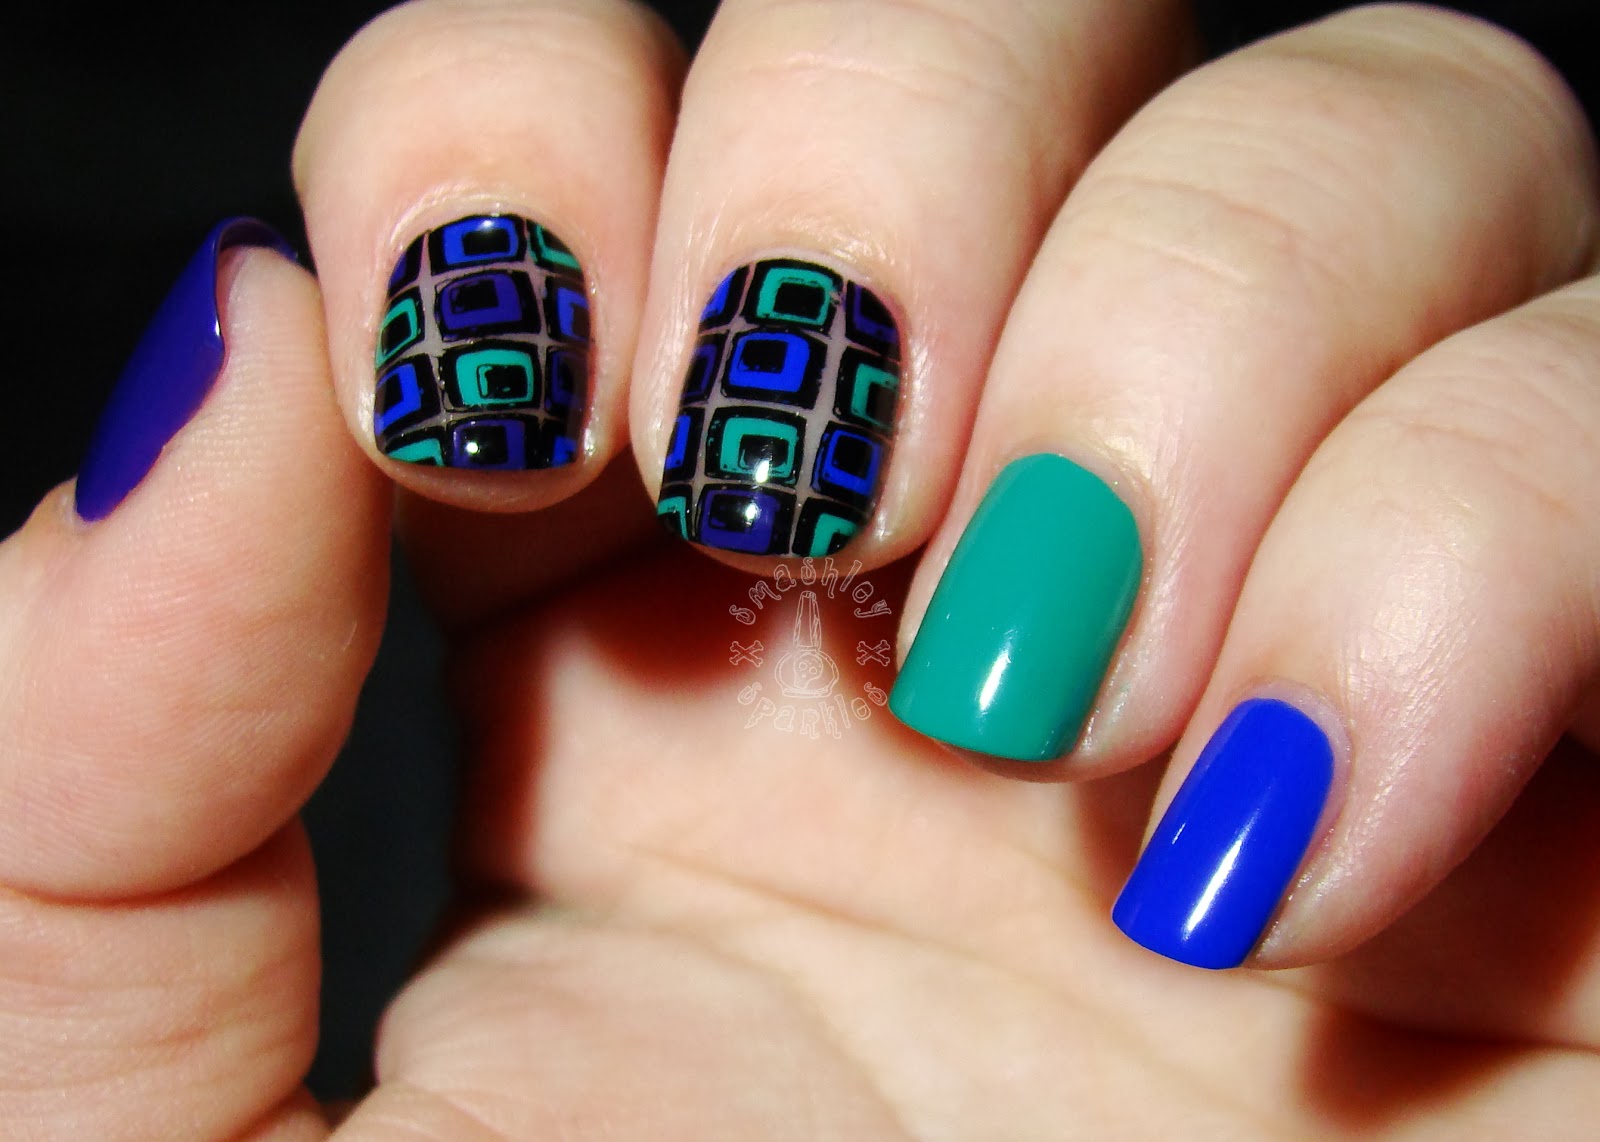 3. Colorful Nail Art Ideas - wide 6